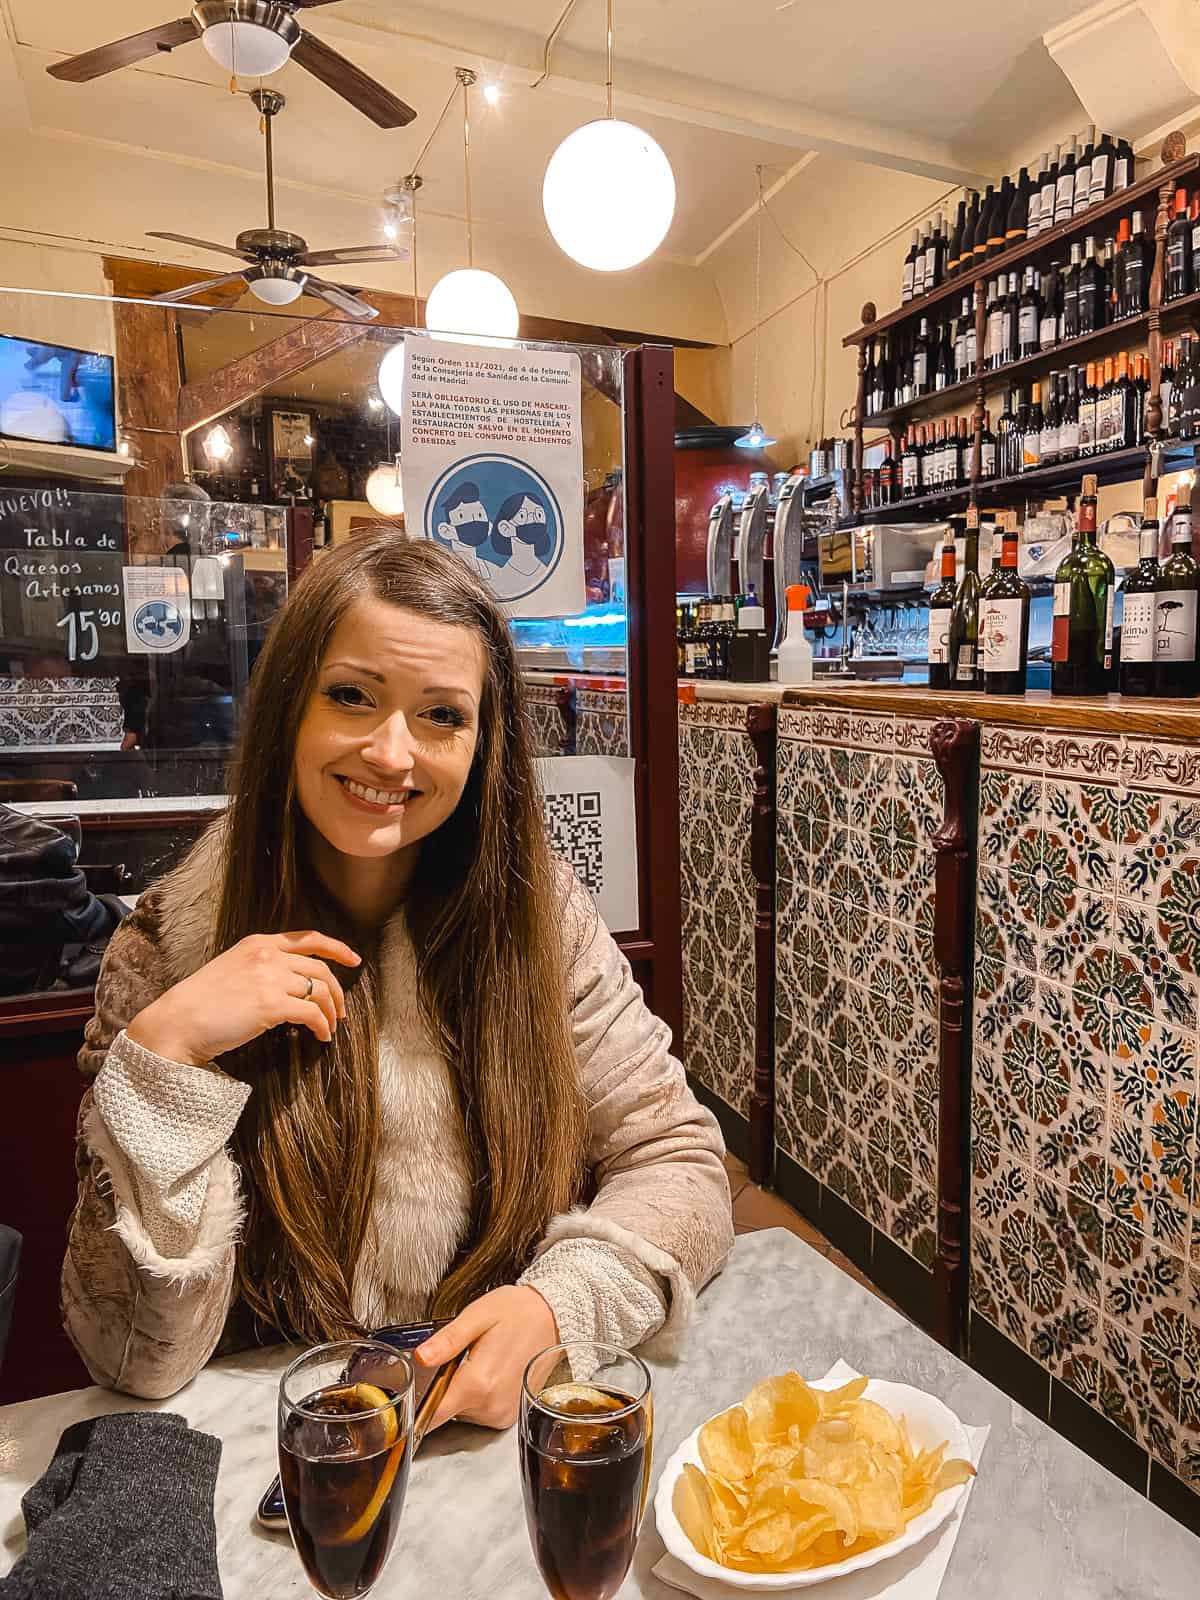 A smiling woman seated at a bar with traditional tiles, enjoying a glass of dark beverage with a bowl of chips, creating a cozy dining atmosphere.